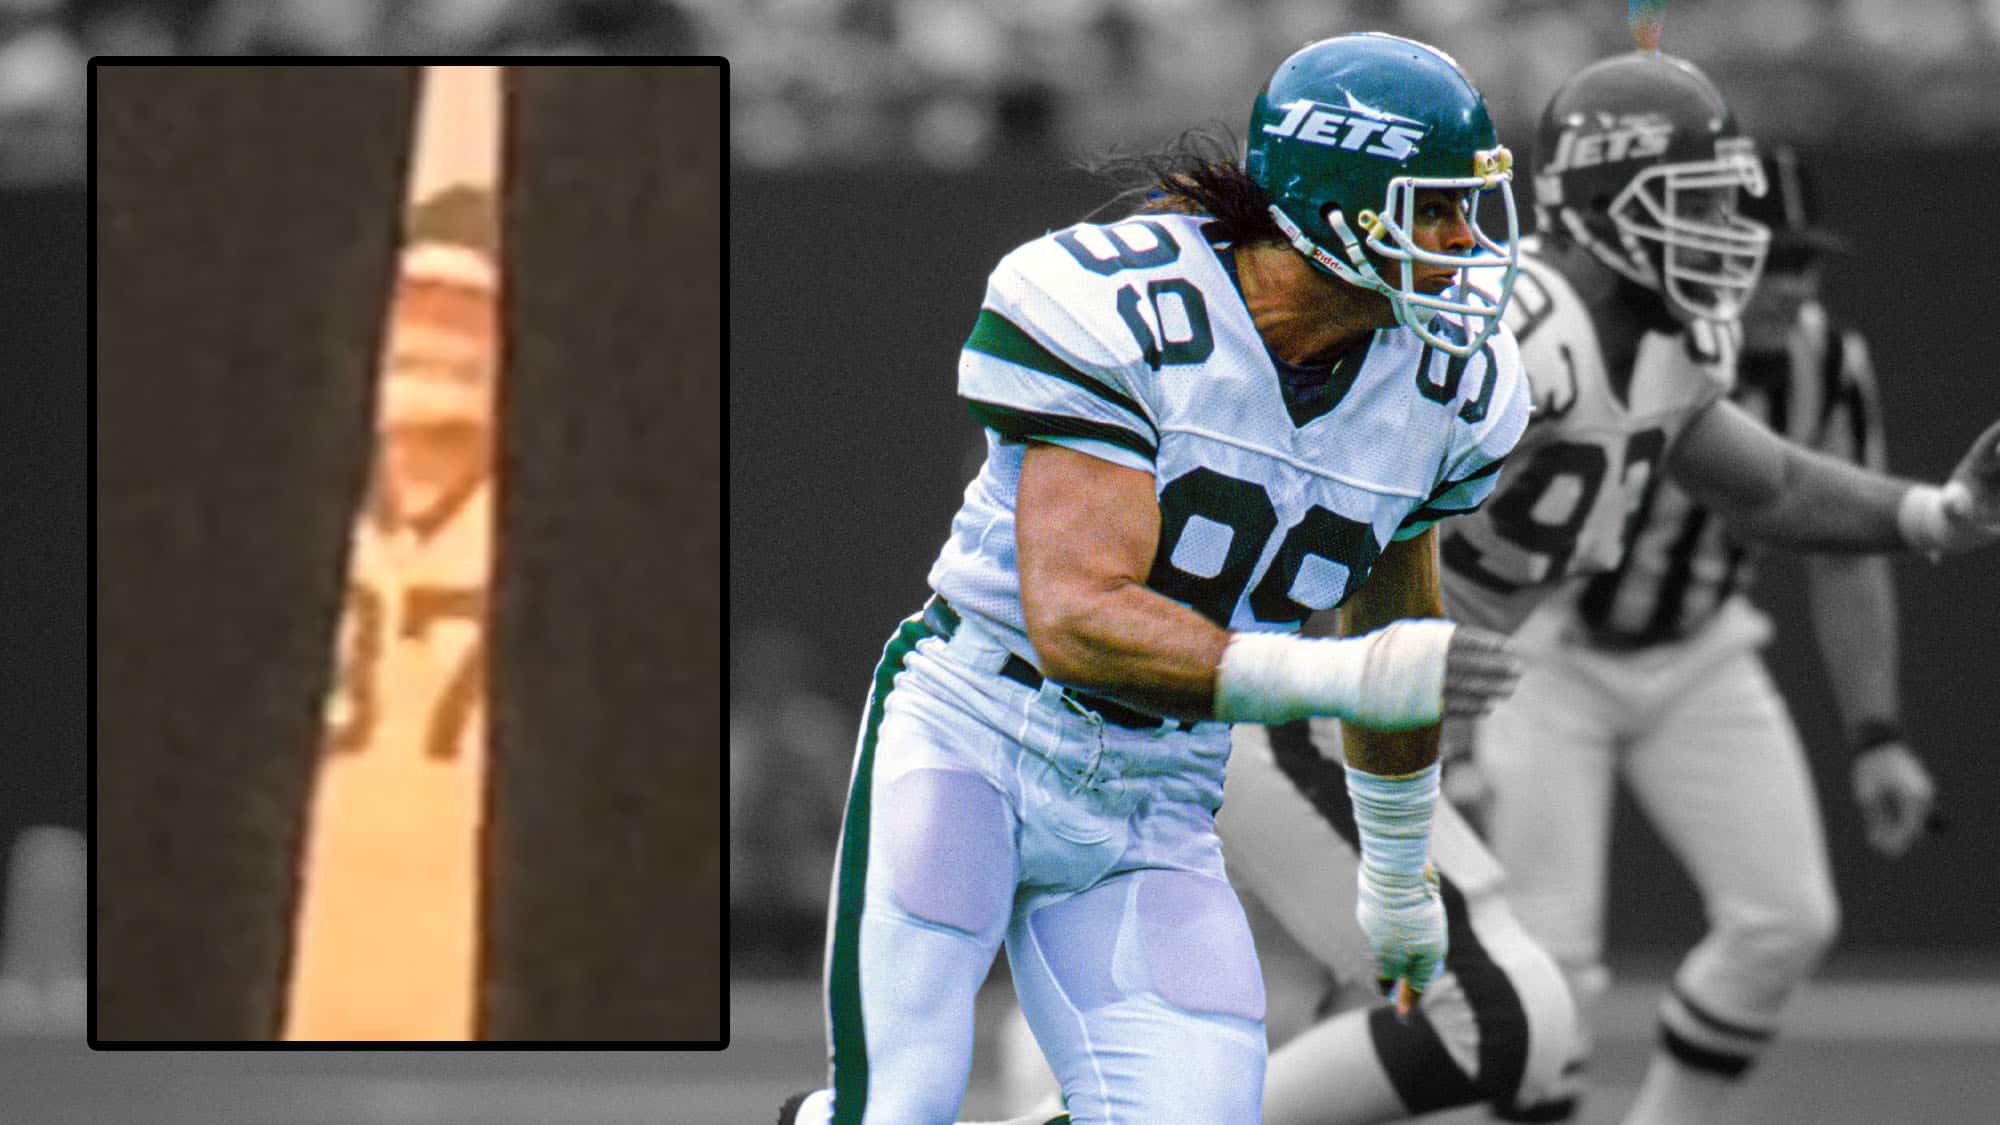 Possible NY Jets throwback uniforms leak online